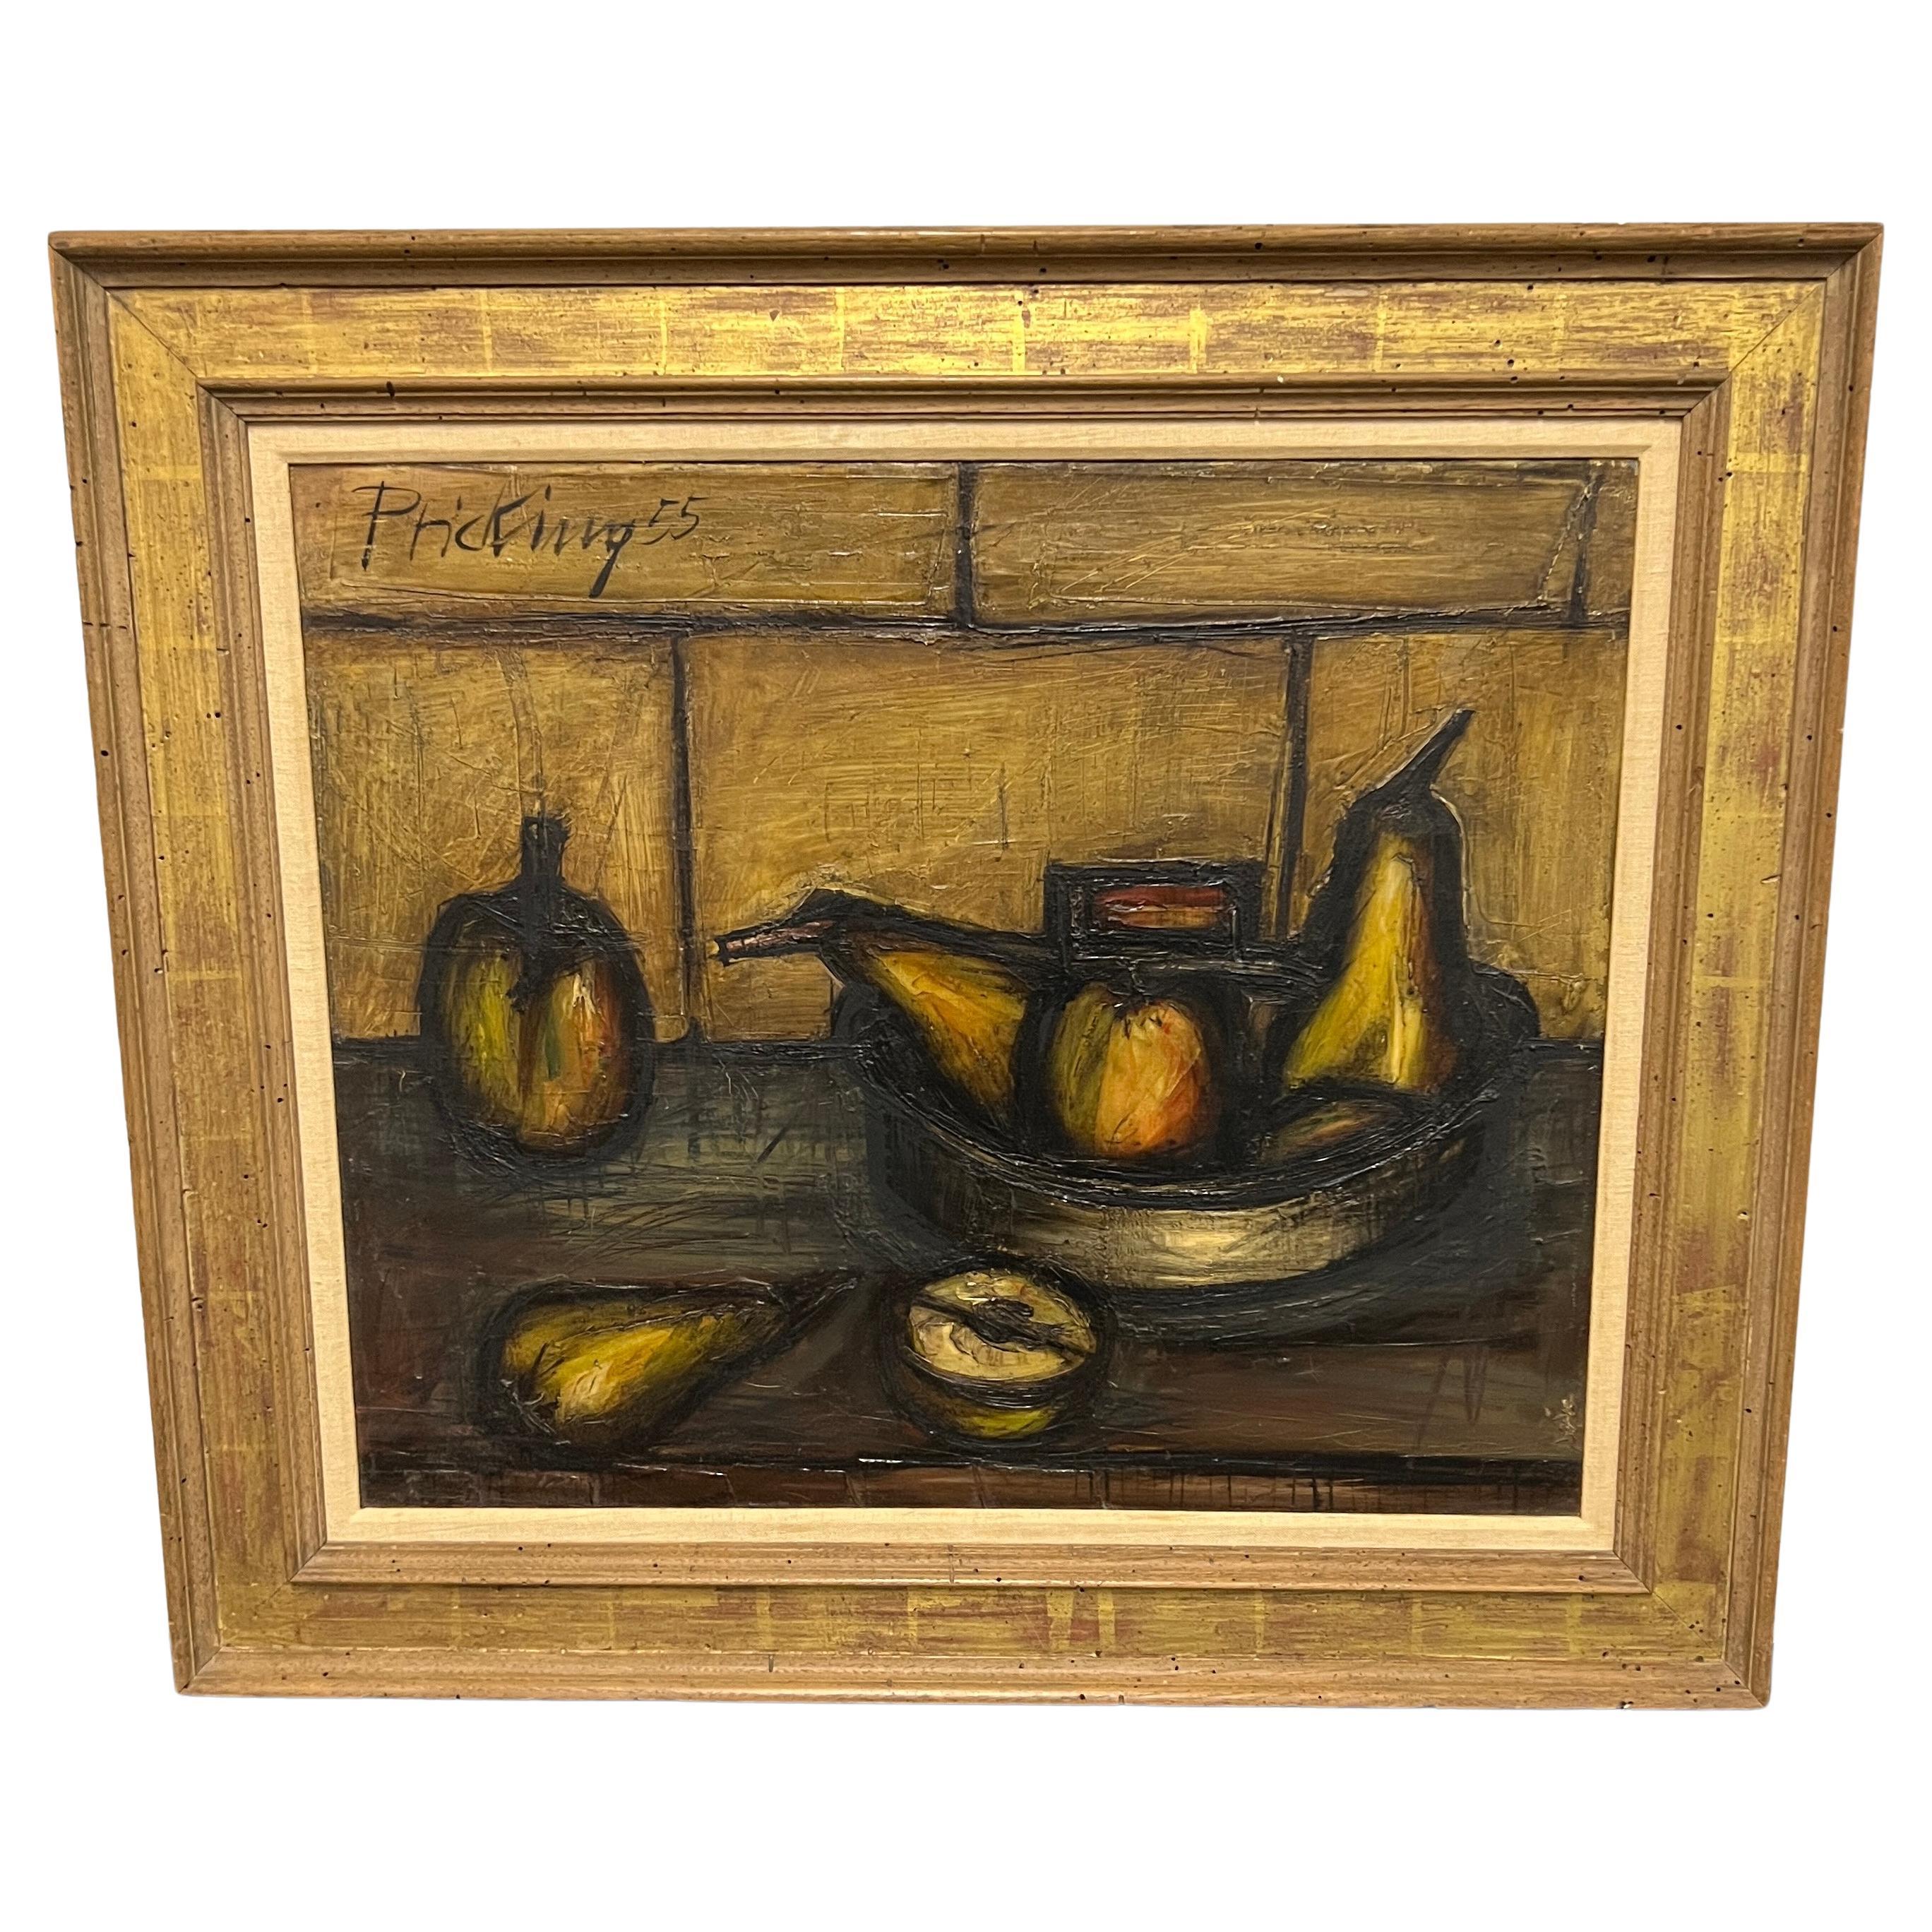 Impressive Mid-Century Still Life Painting by Franz Pricking dated 1955